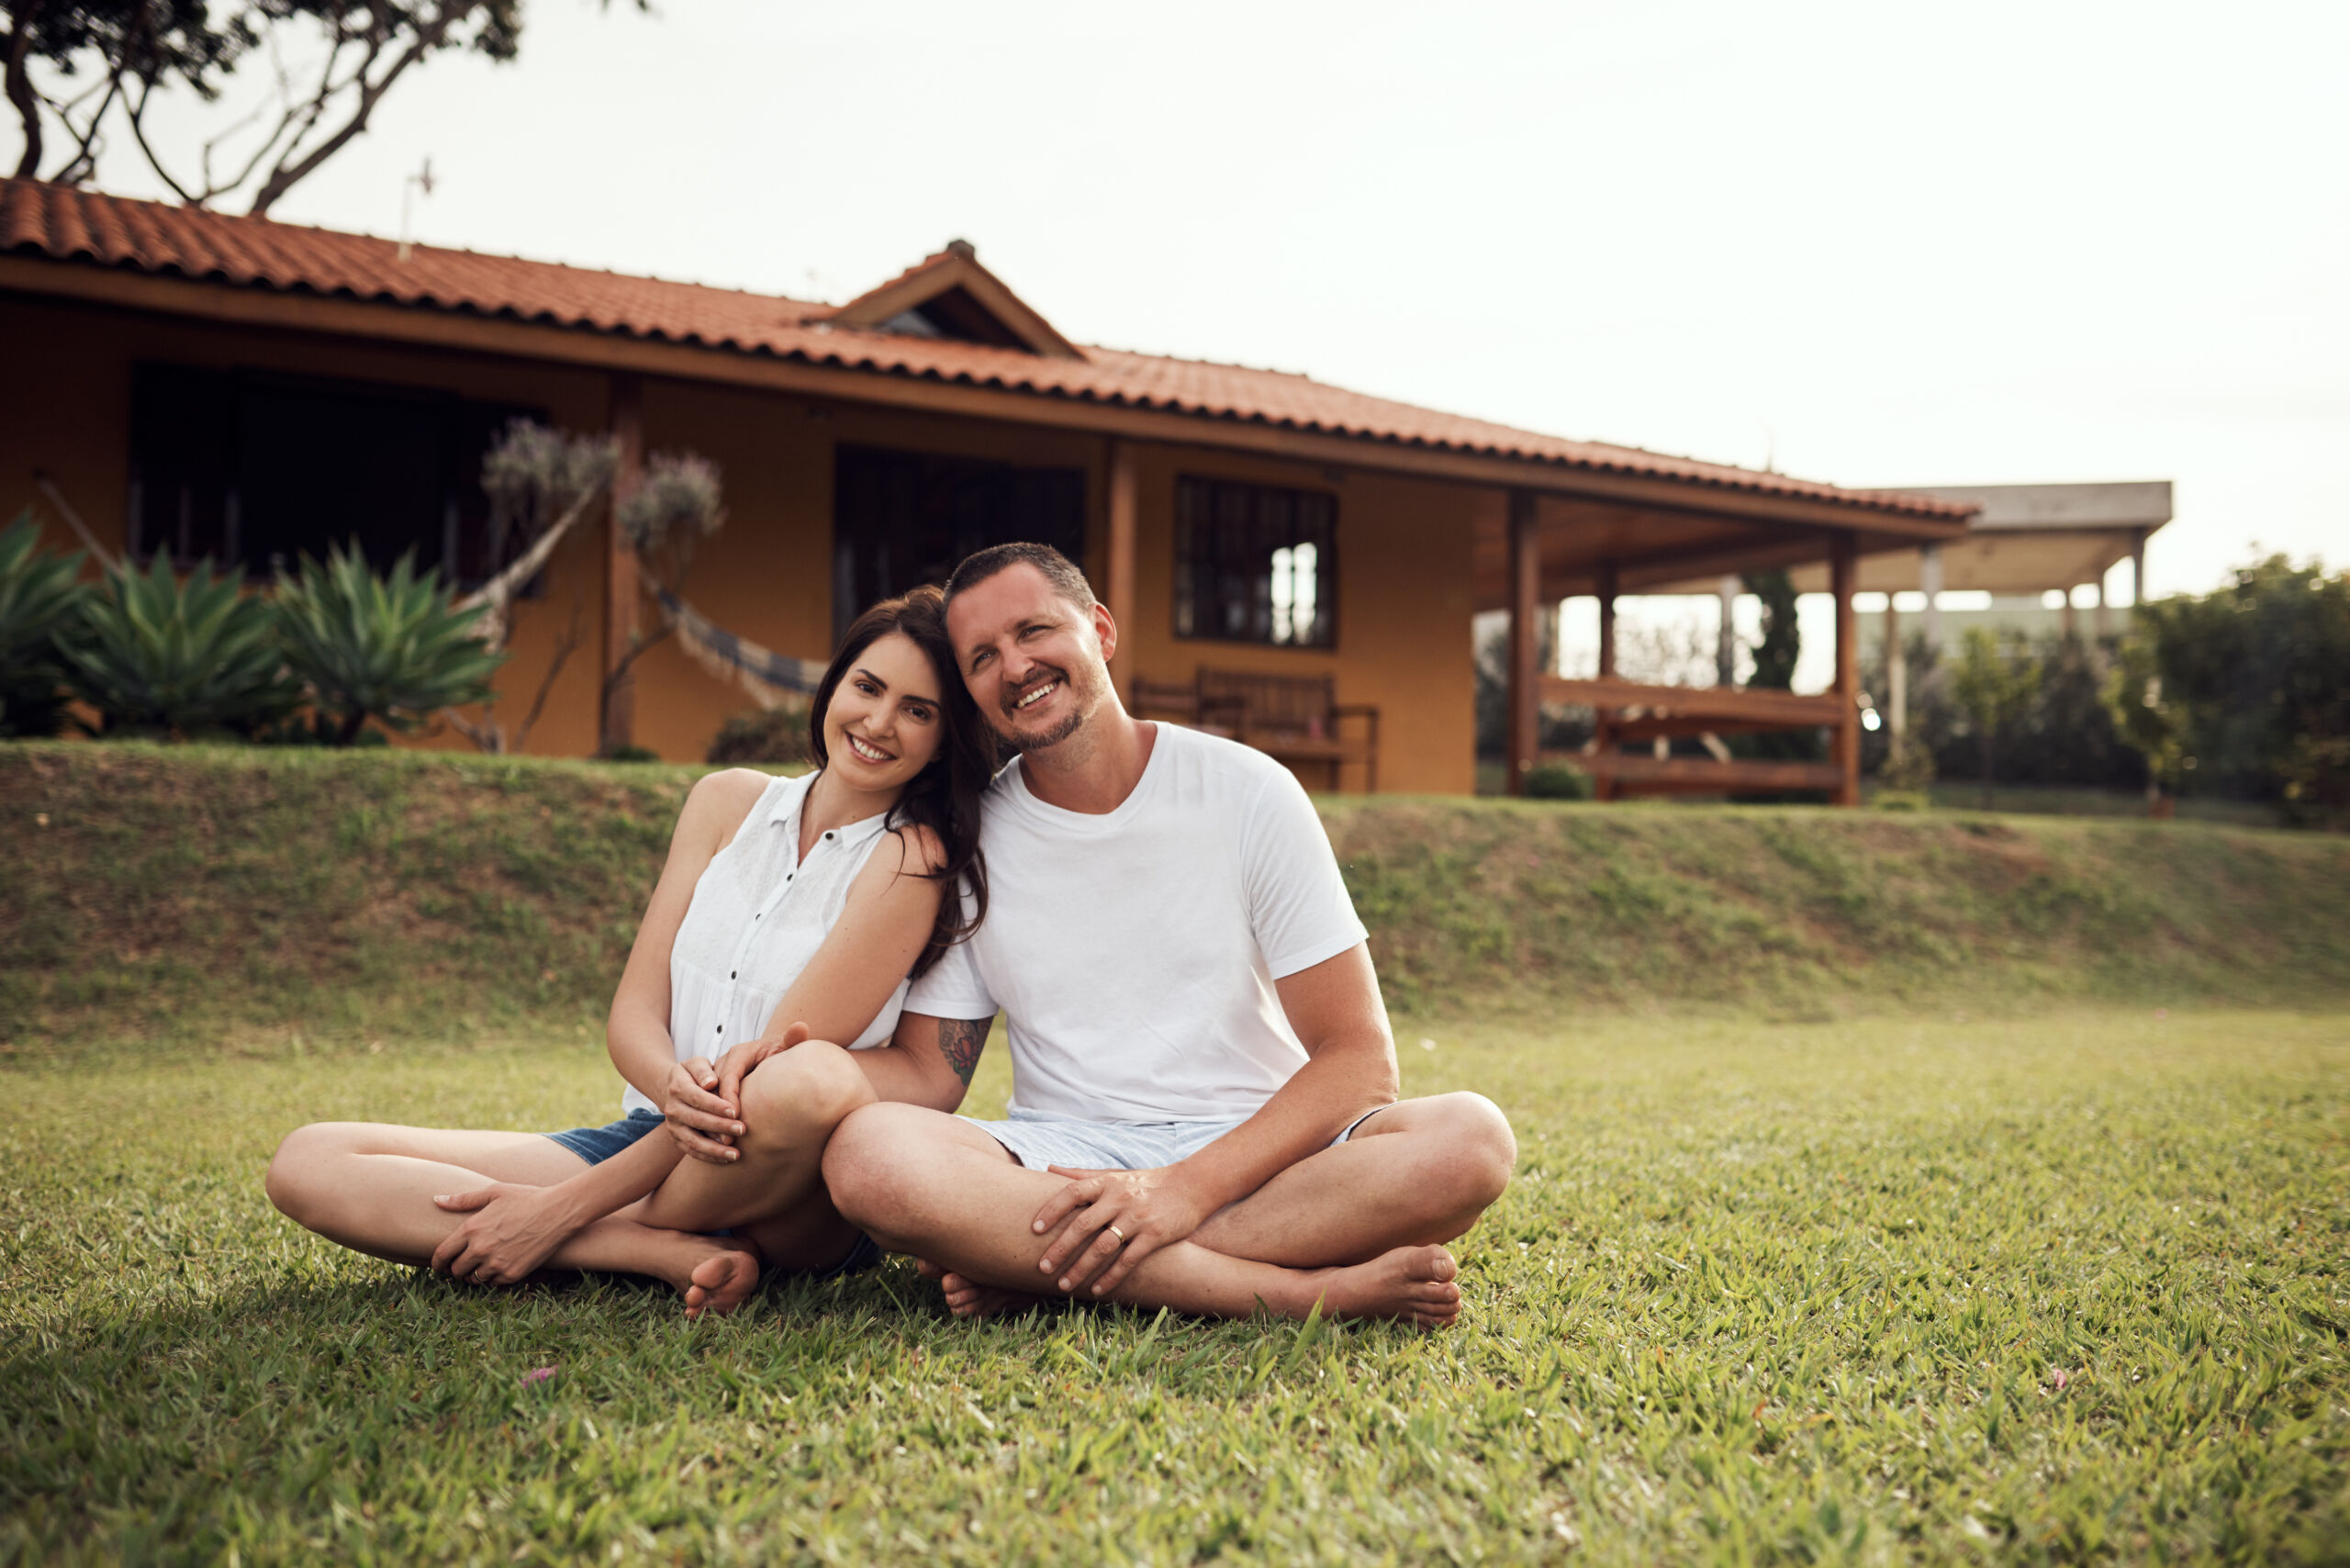 An image of a young, married couple sitting in the grass in front of their house. Both are smiling. Did insurance pay for replacing their roof?